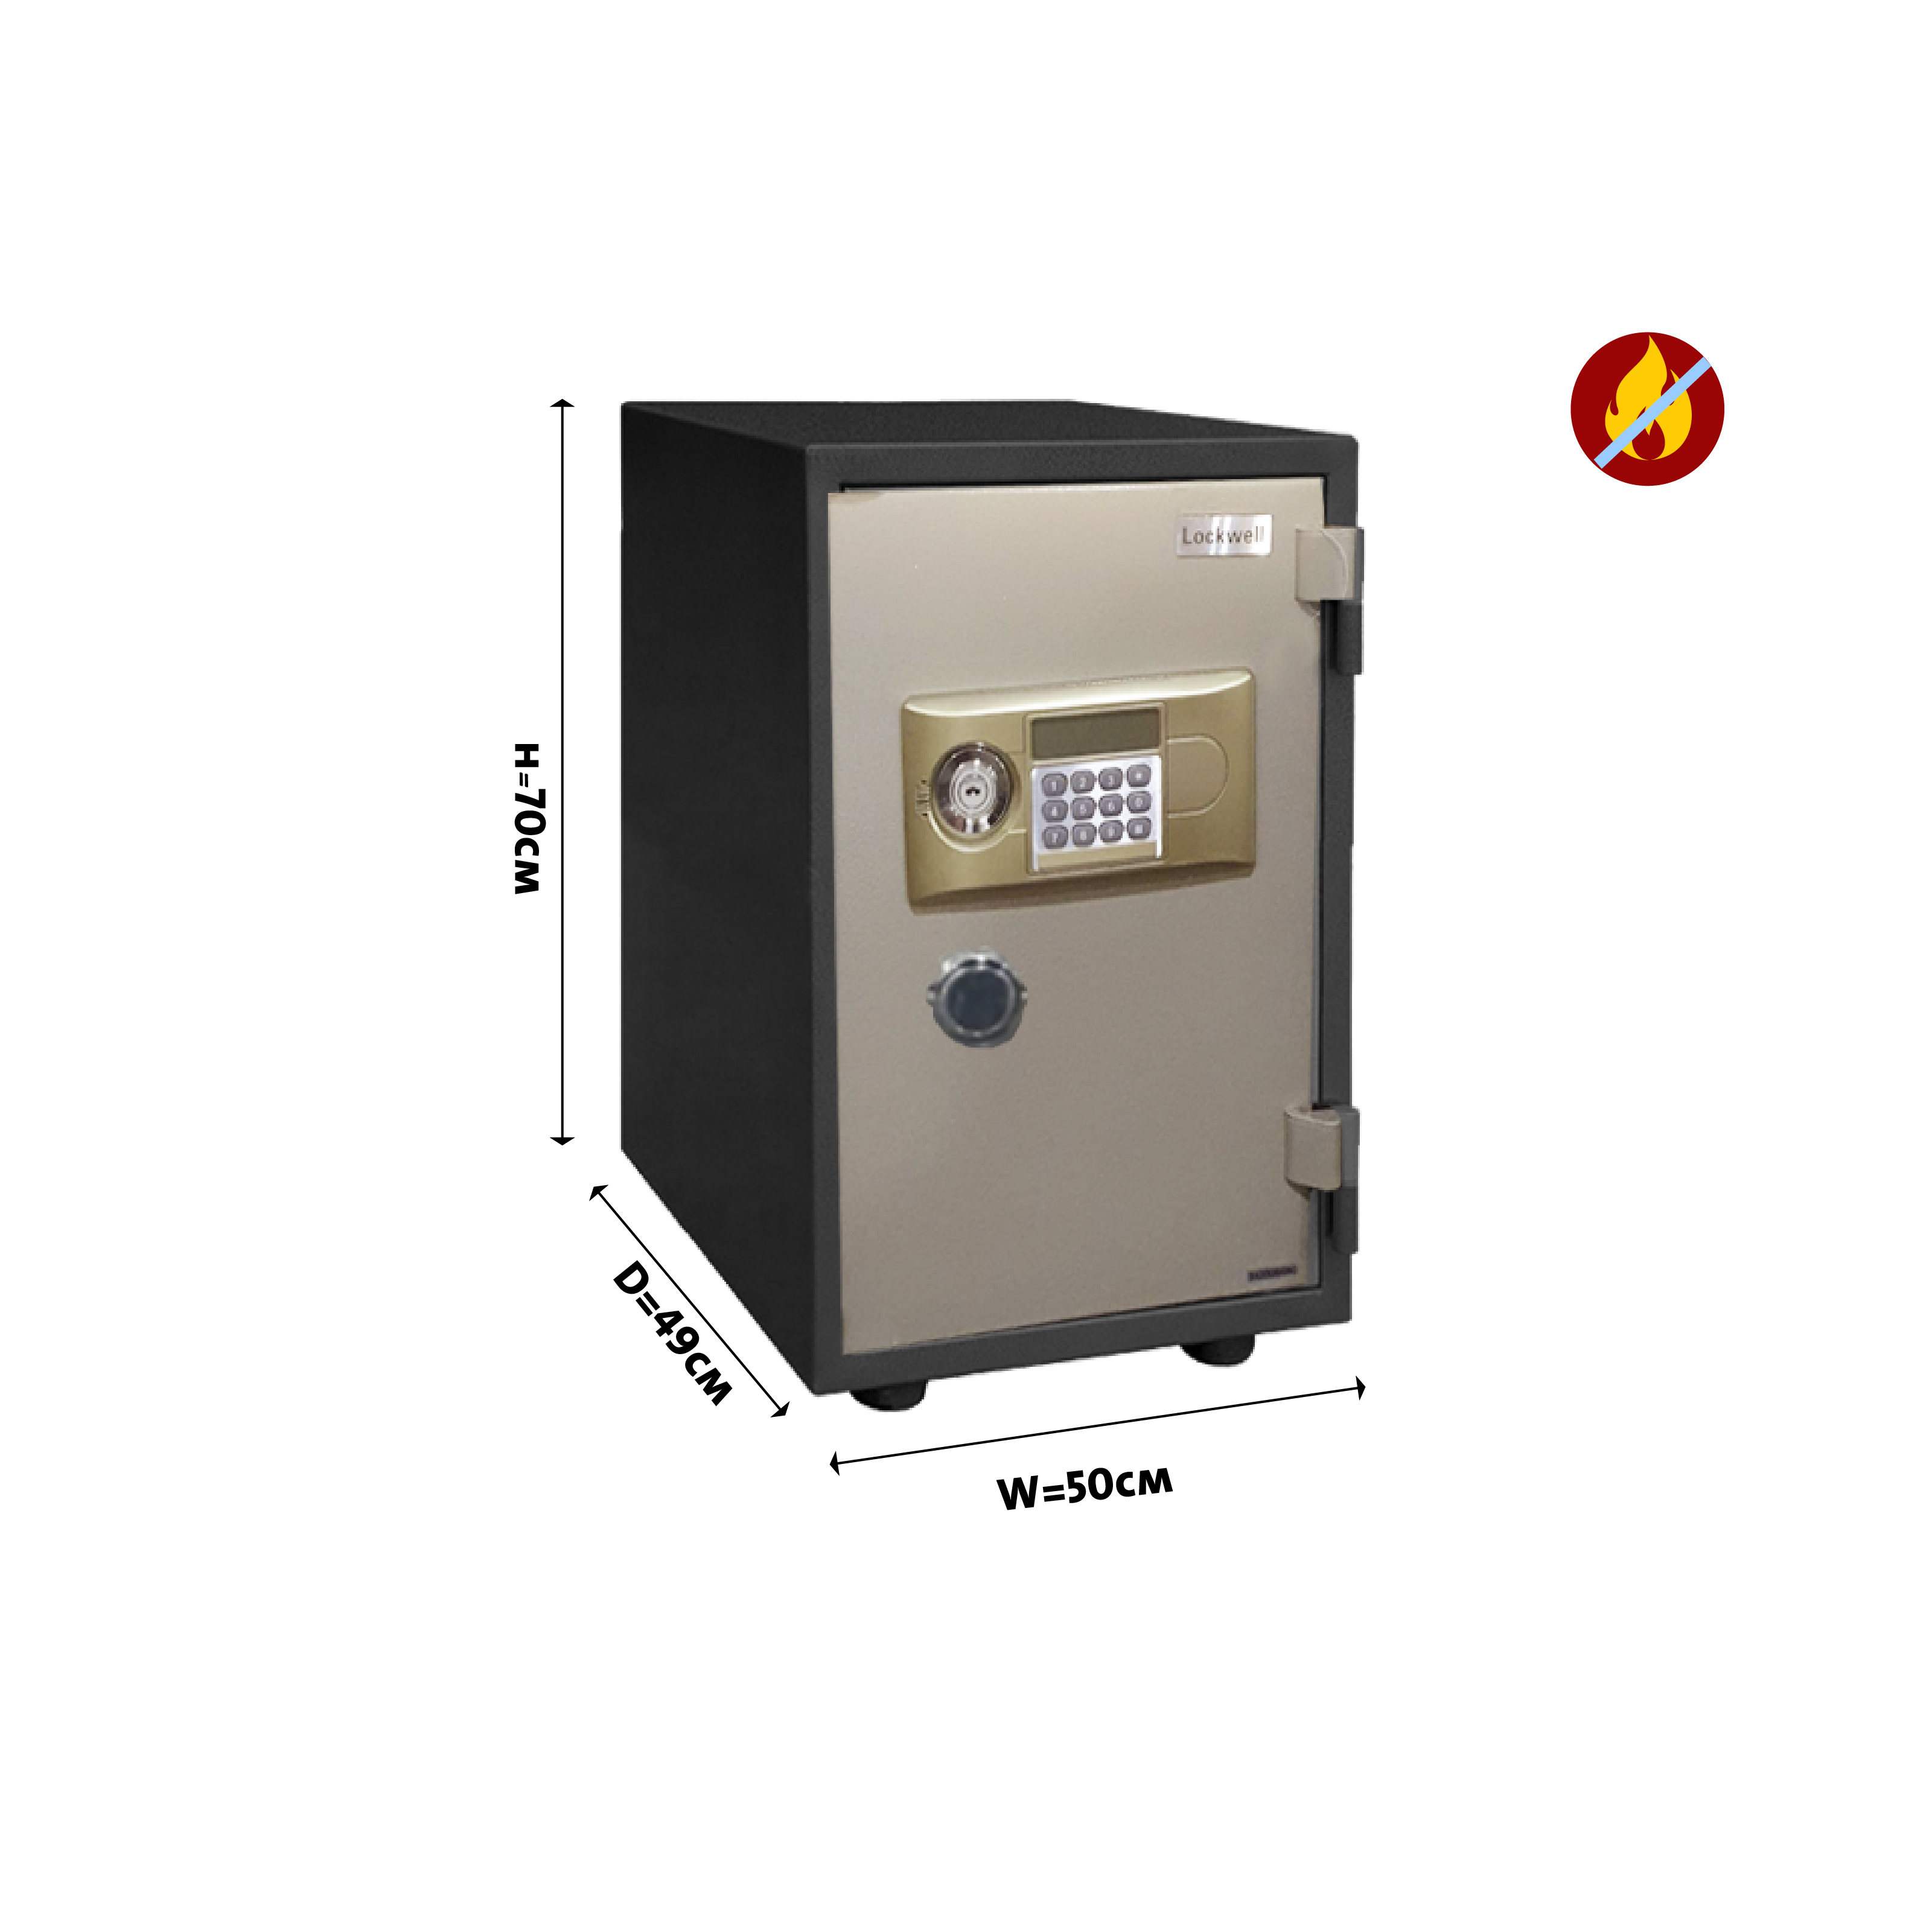 Lockwell ELectronic Fire Safe, YB700ALD 